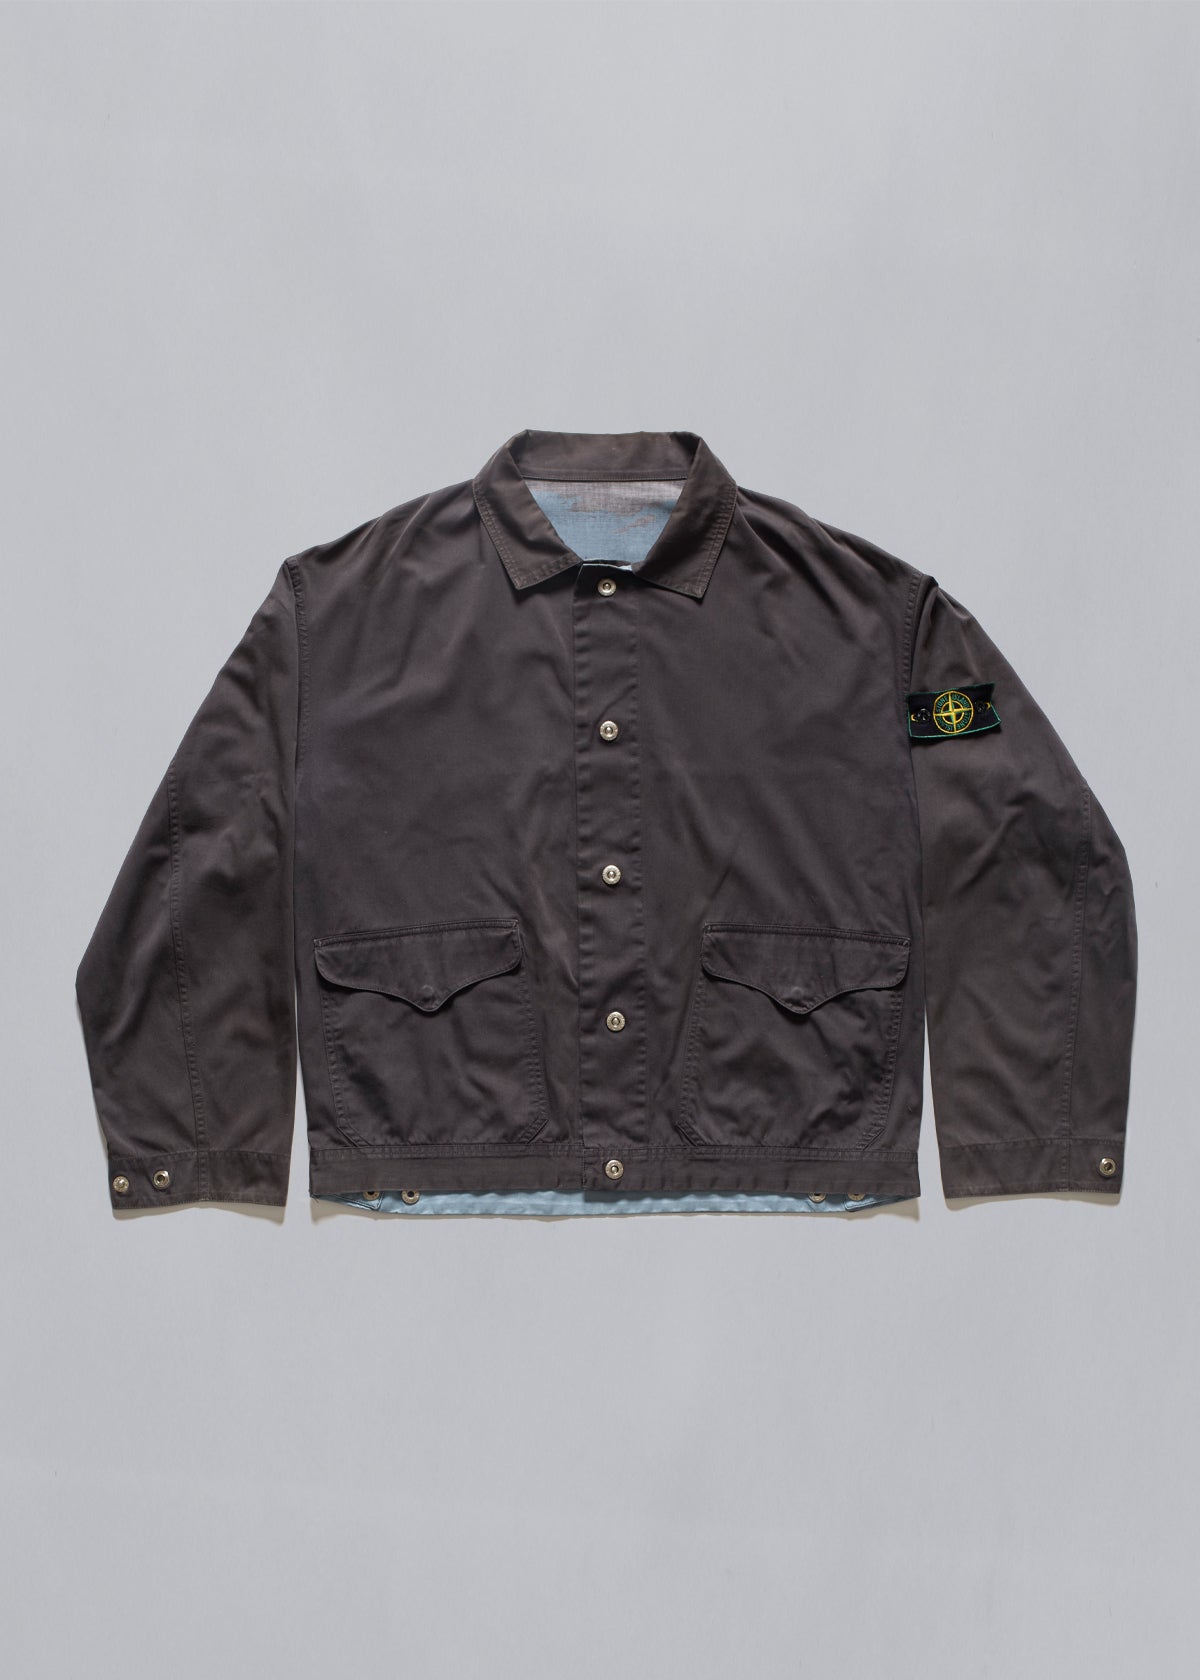 Raso Gommato Reversible Jacket SS1993 - X-Large - The Archivist Store